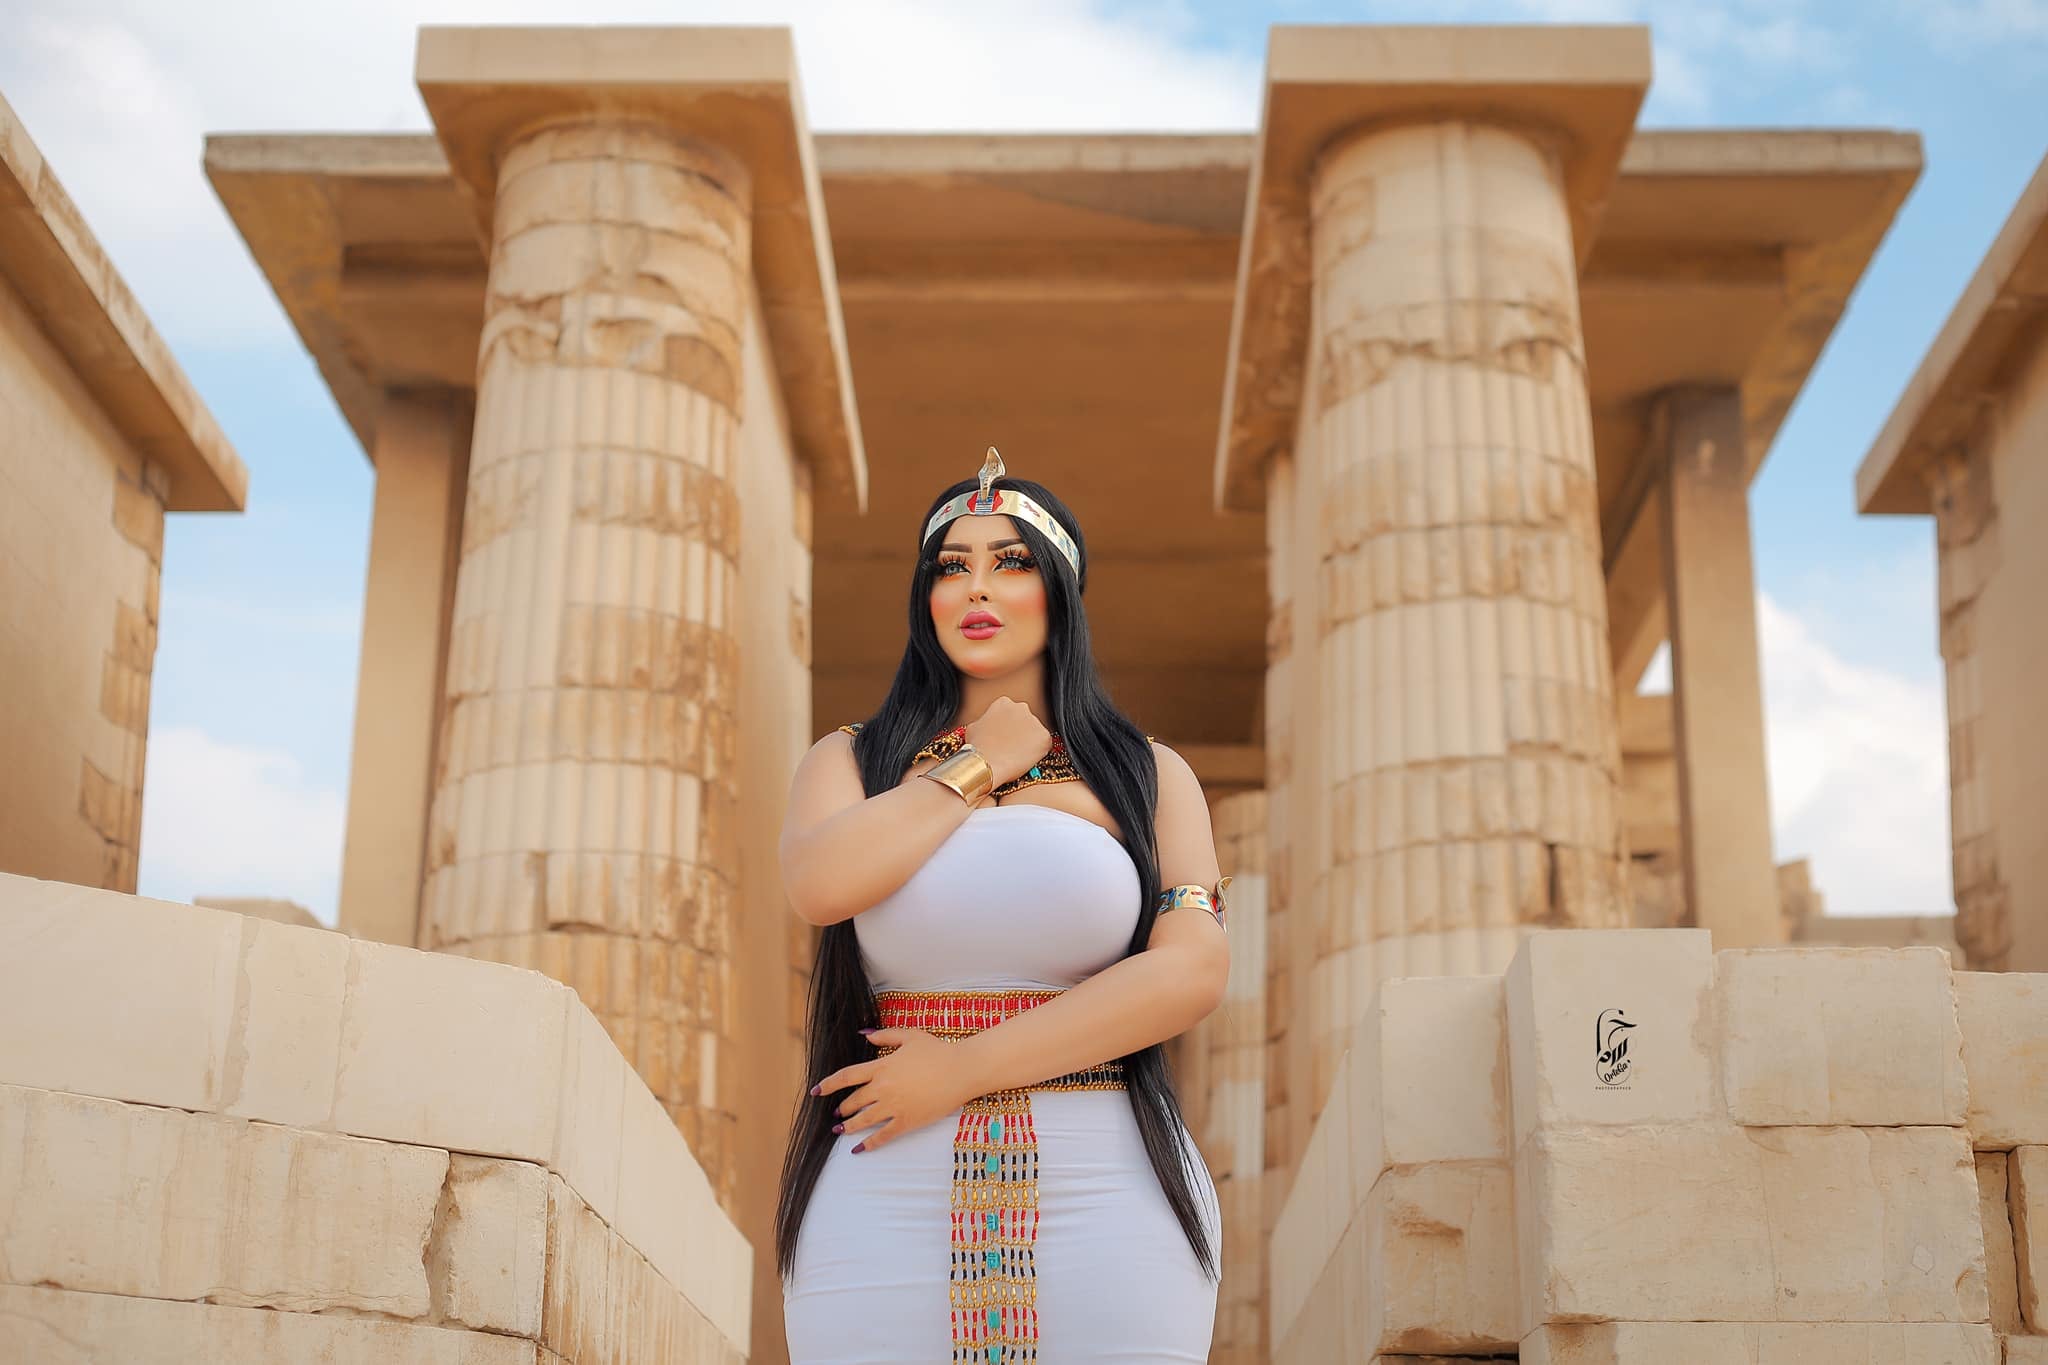 Photos of model Salma El-Shimi in the pyramids are causing a stir in Egypt.